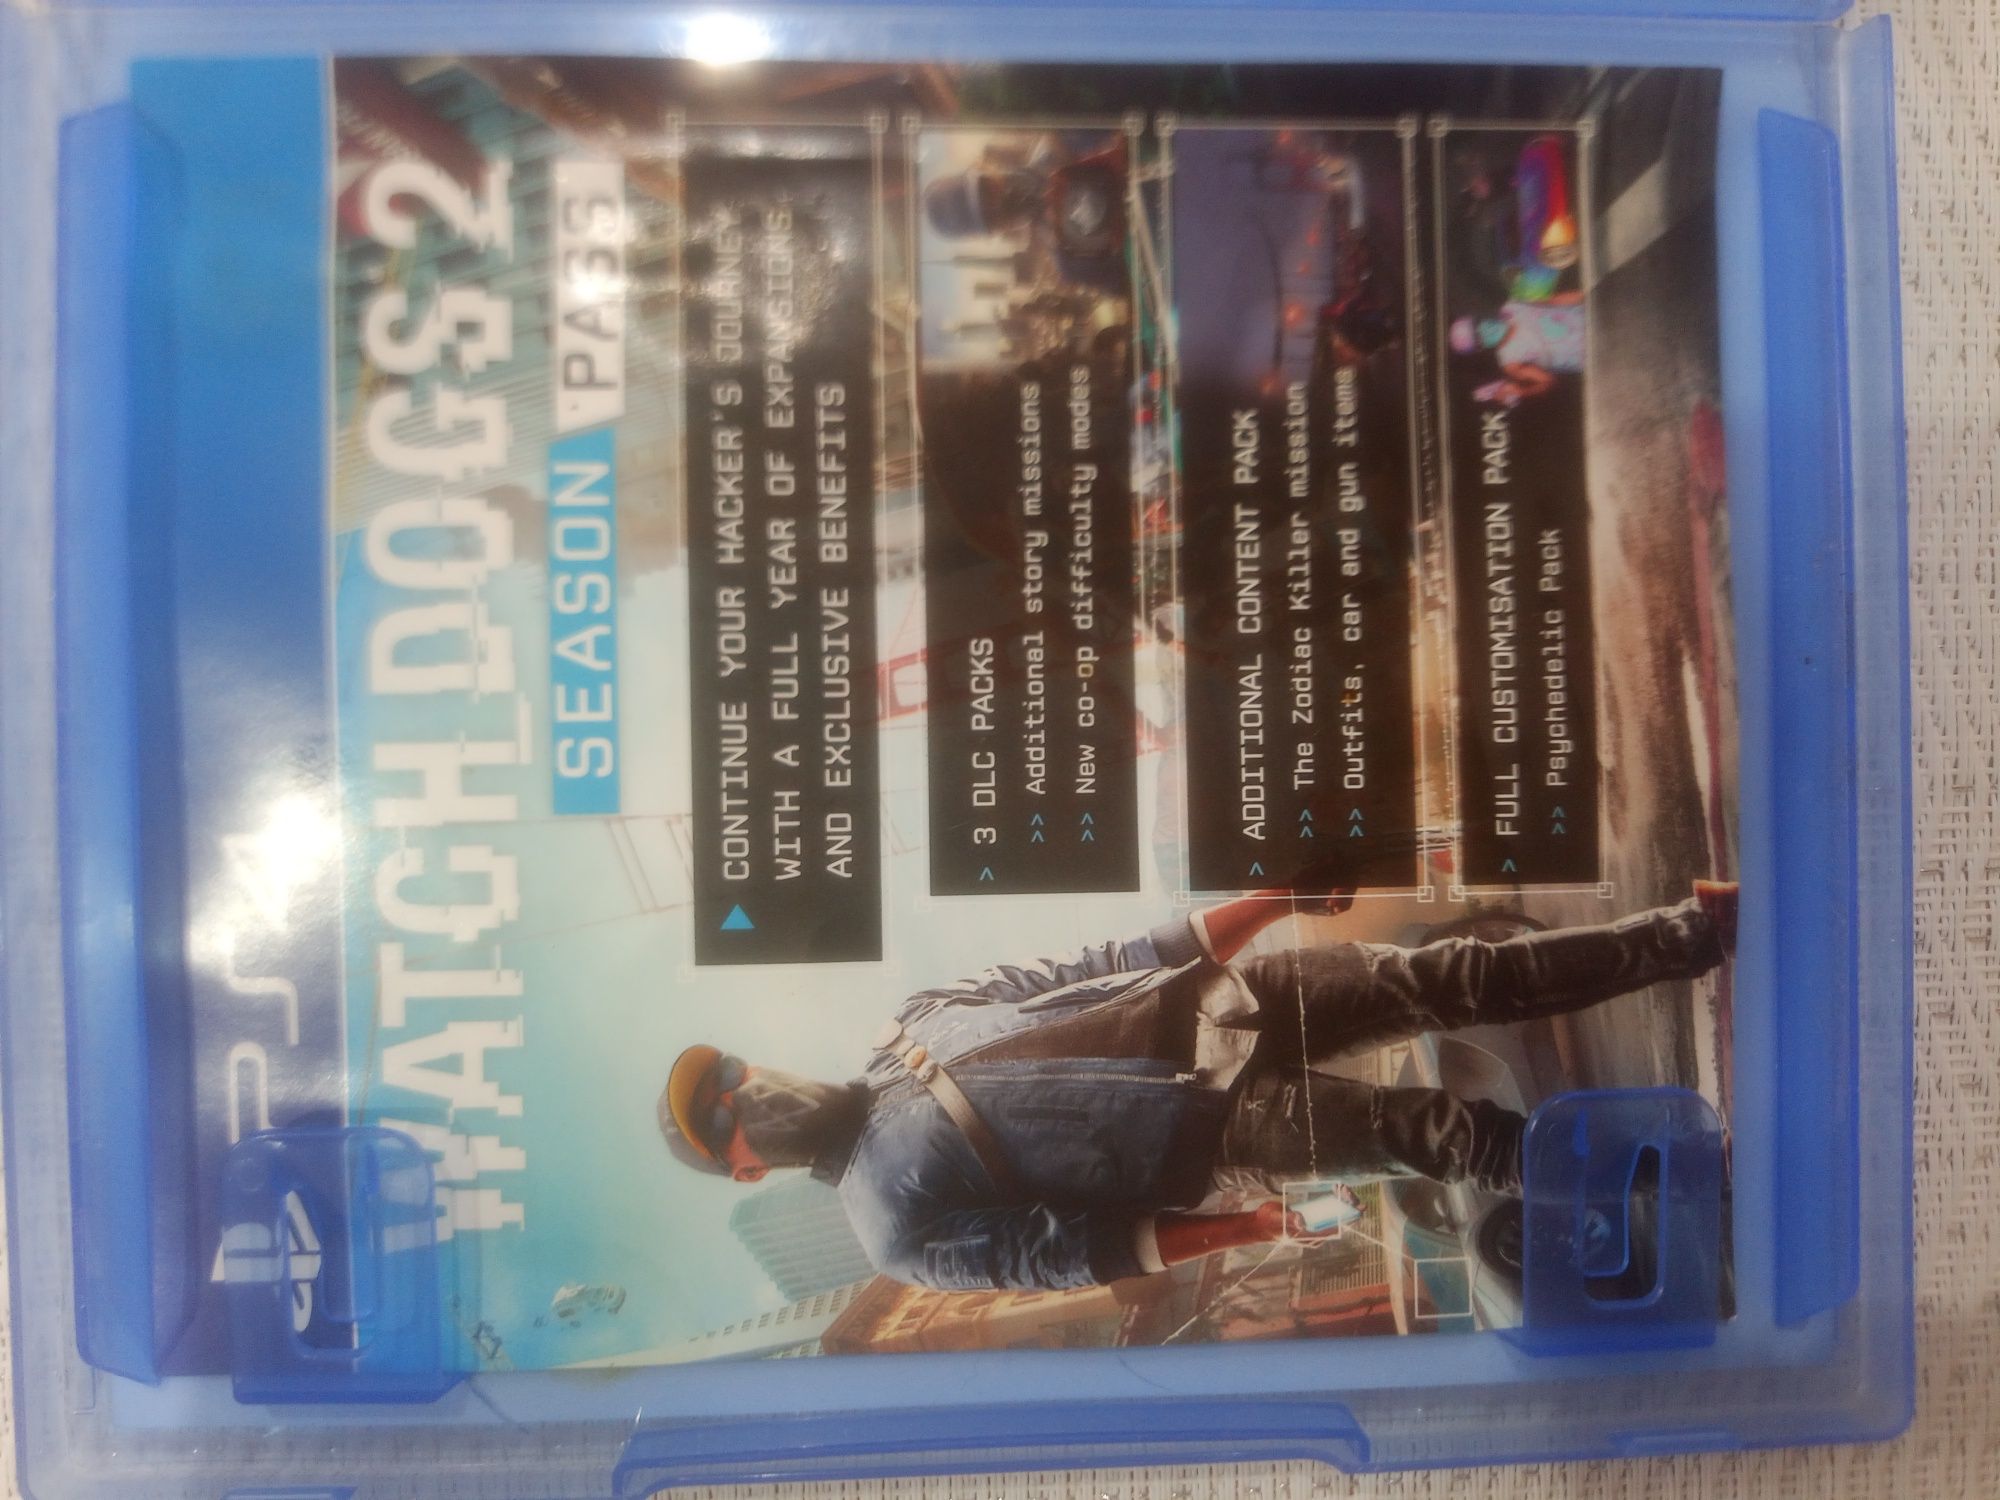 Watch dog's 2 for the ps 4